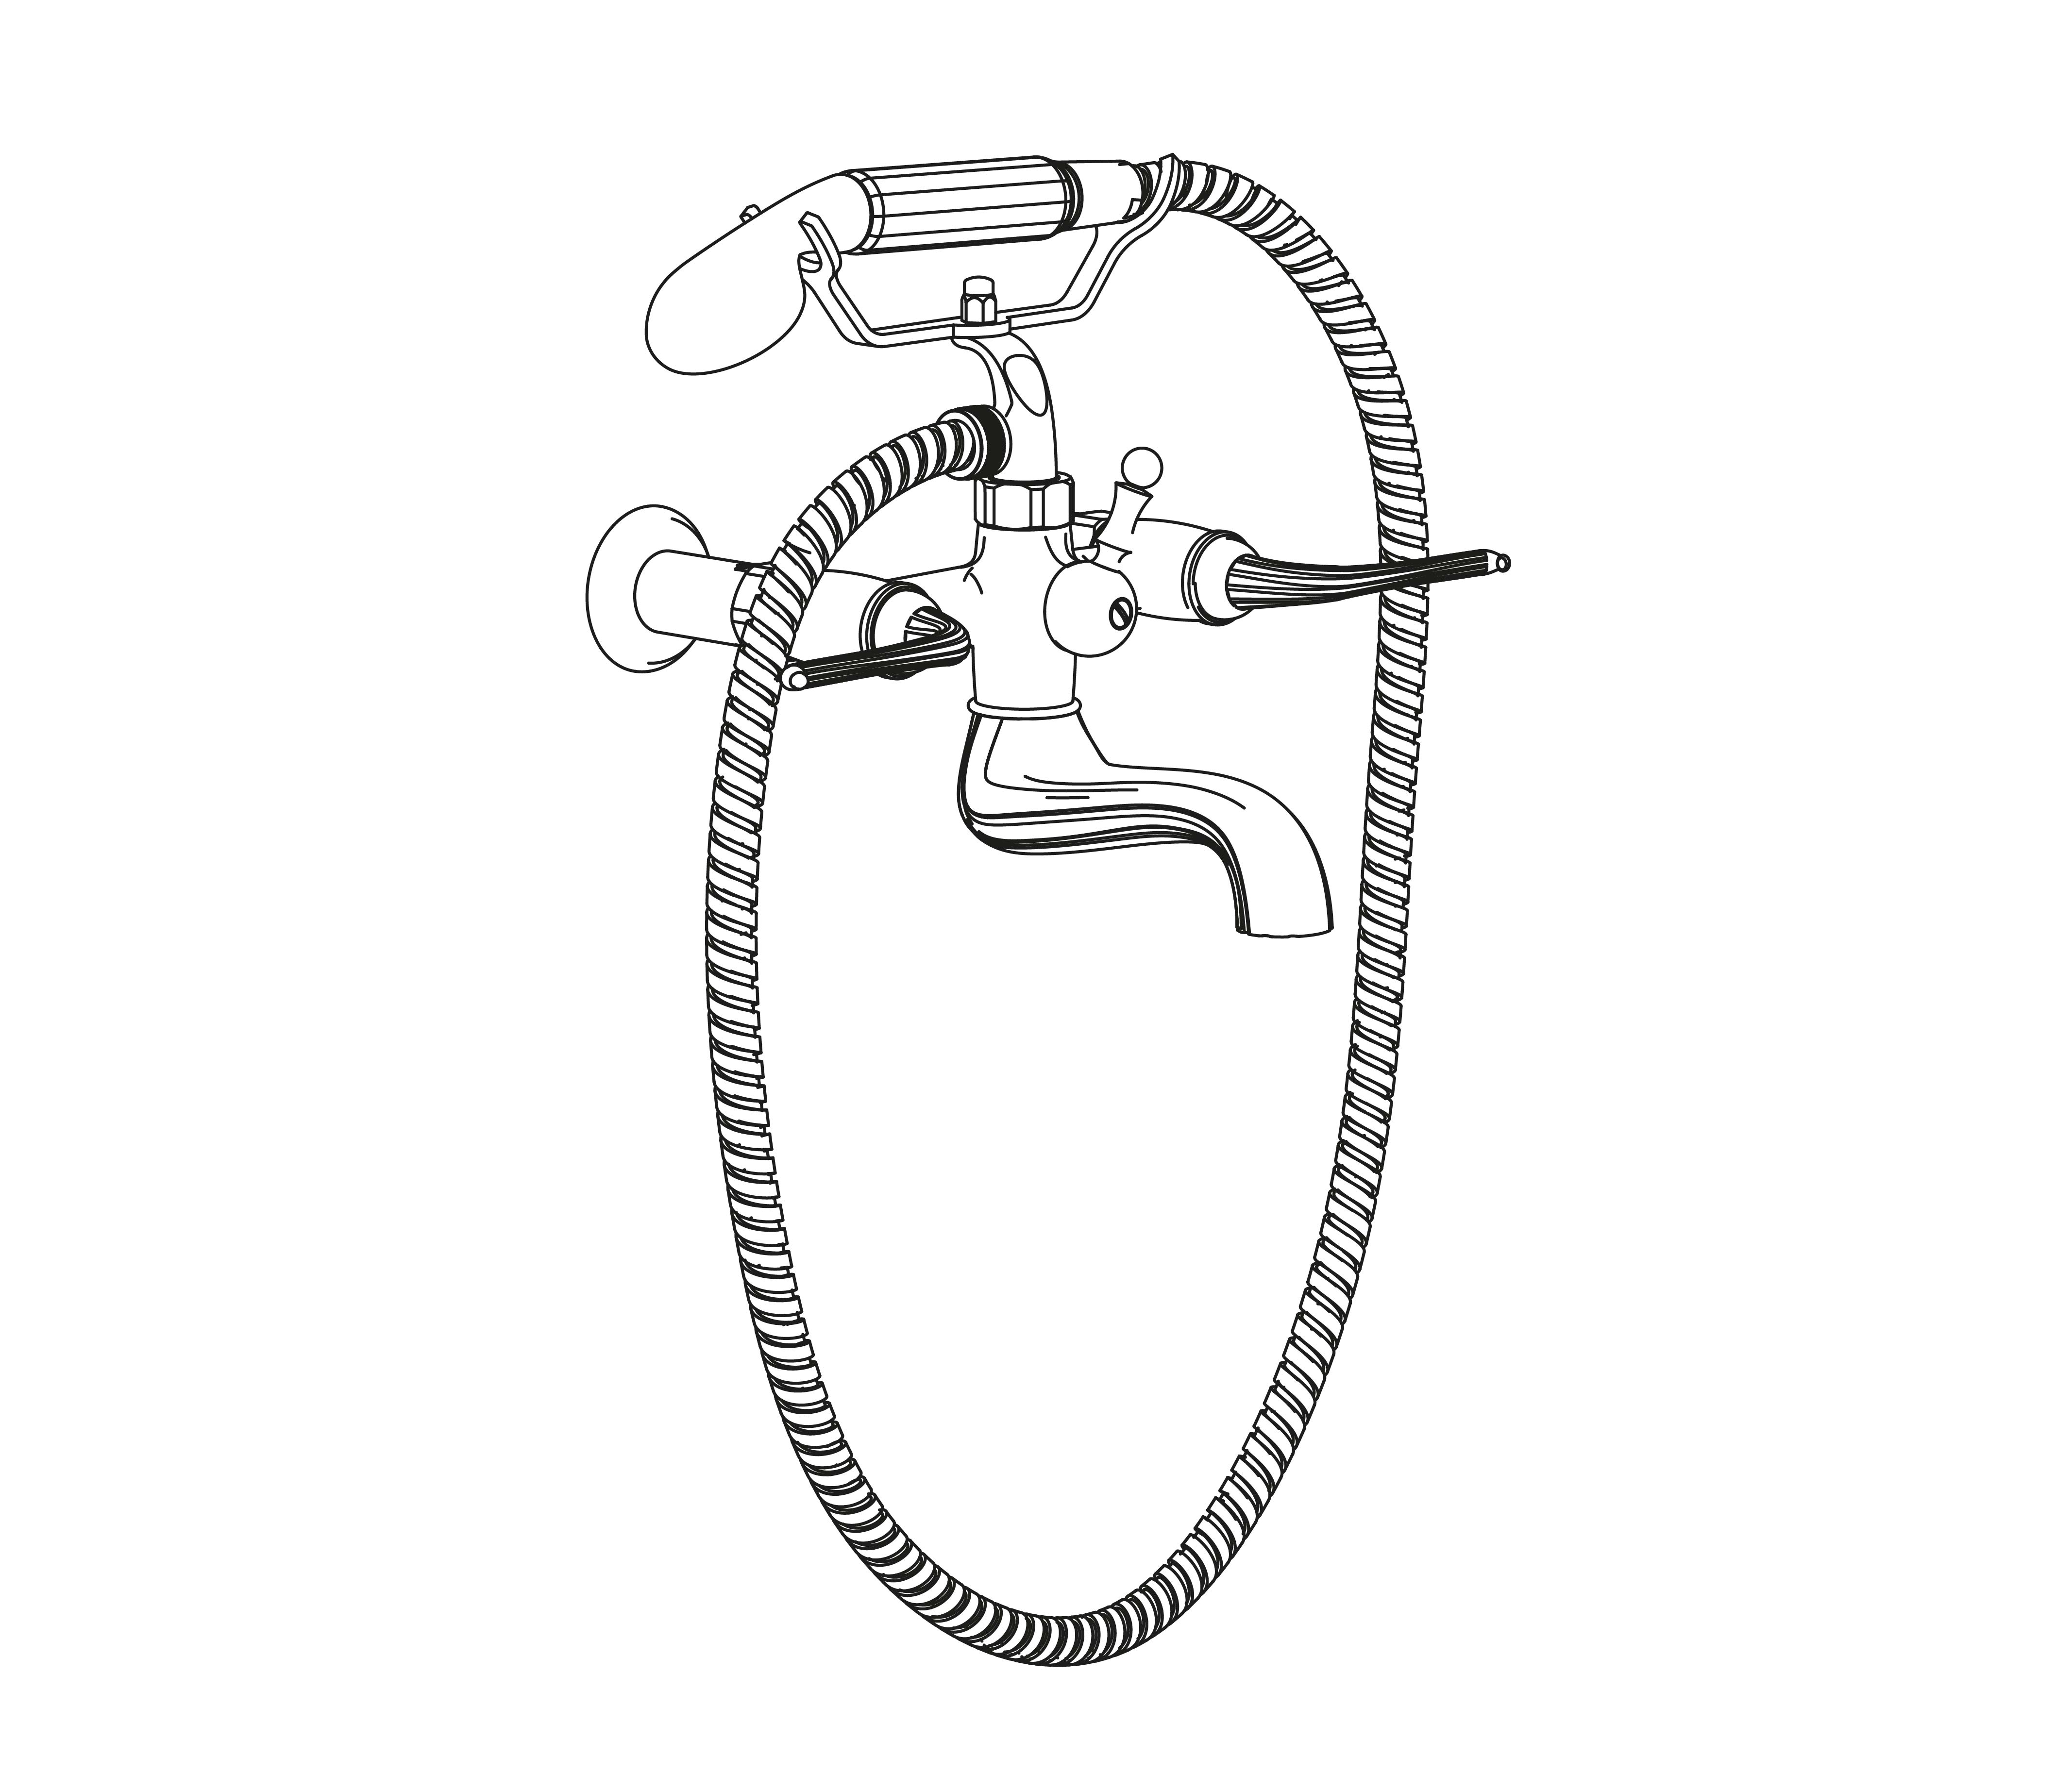 C69-3201 Wall mounted bath and shower mixer